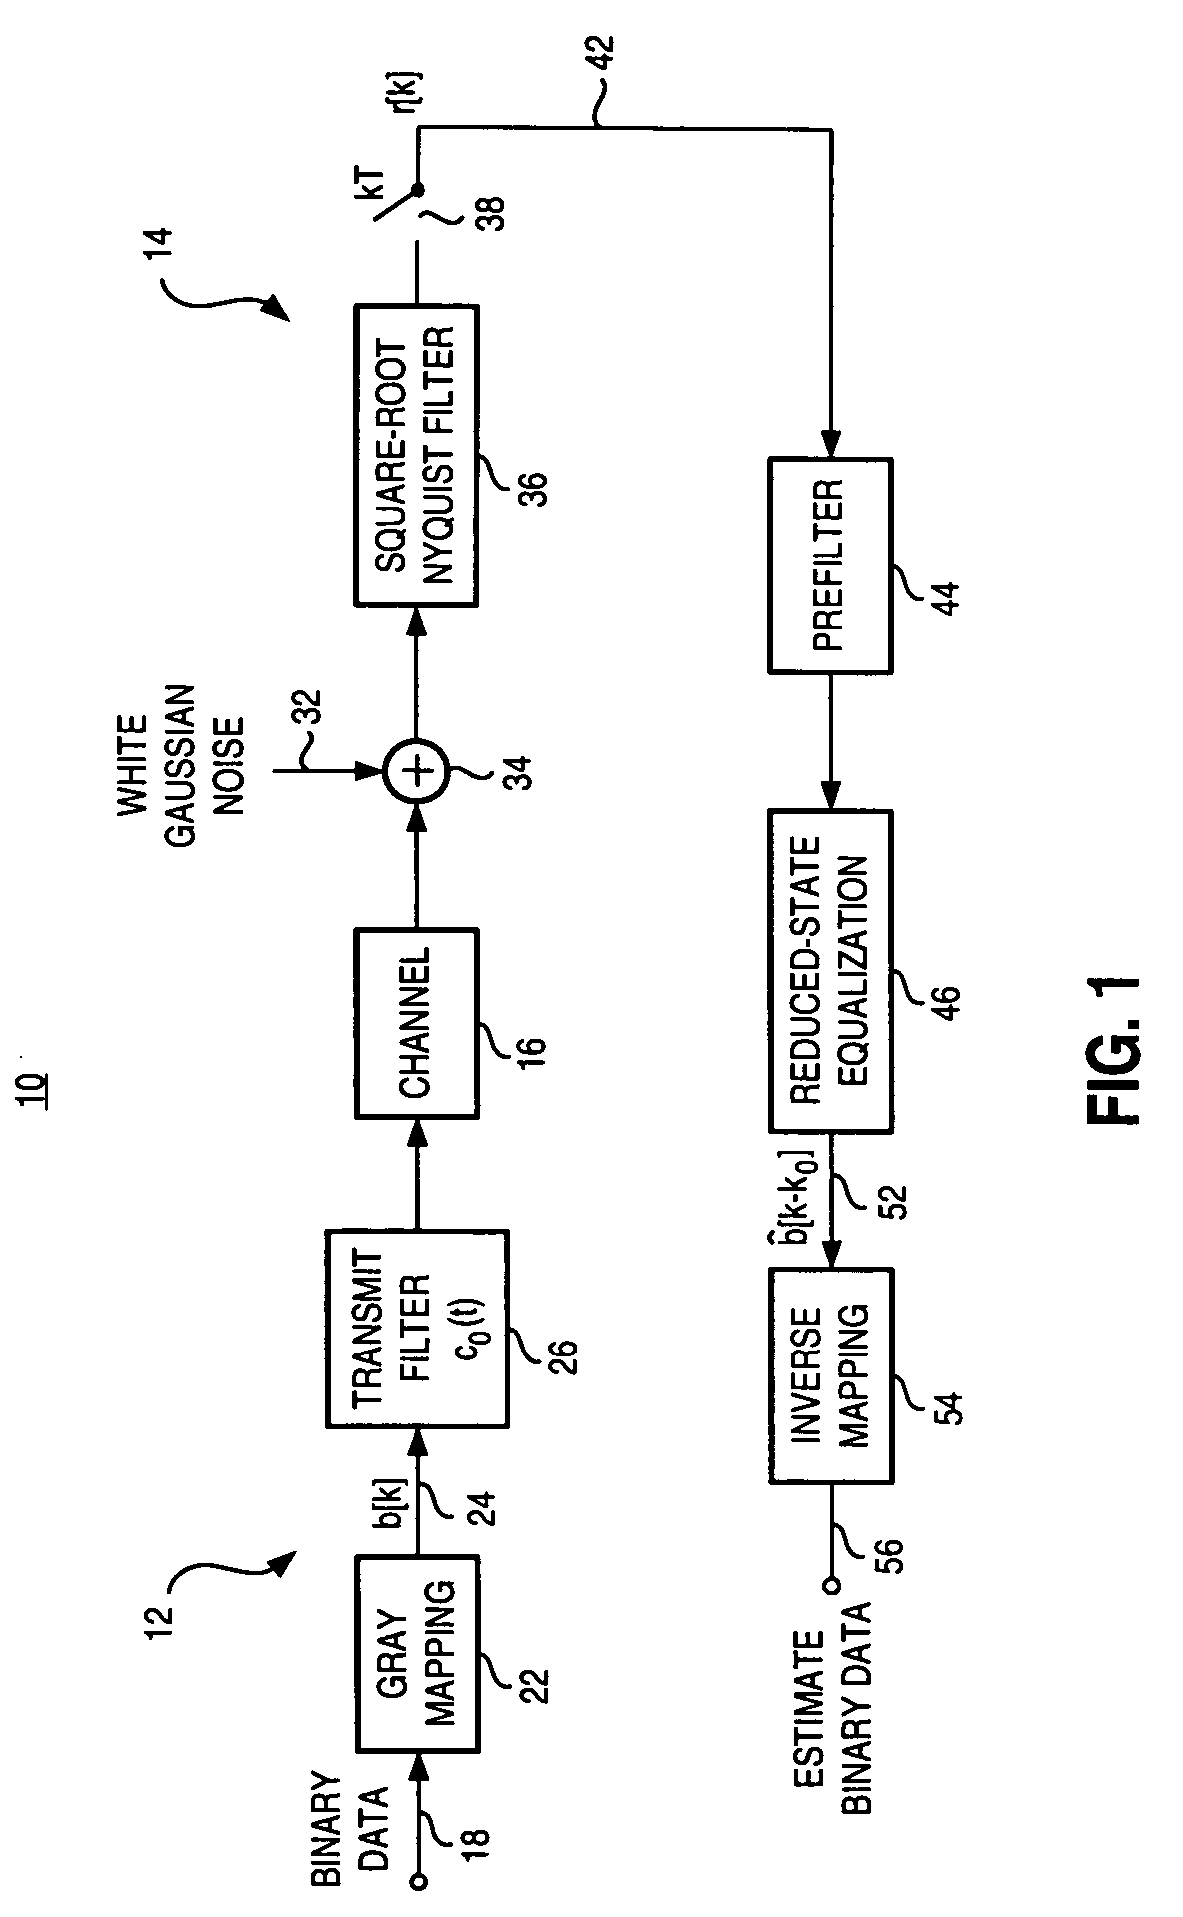 Reduced state sequence estimator using multi-dimensional set partitioning